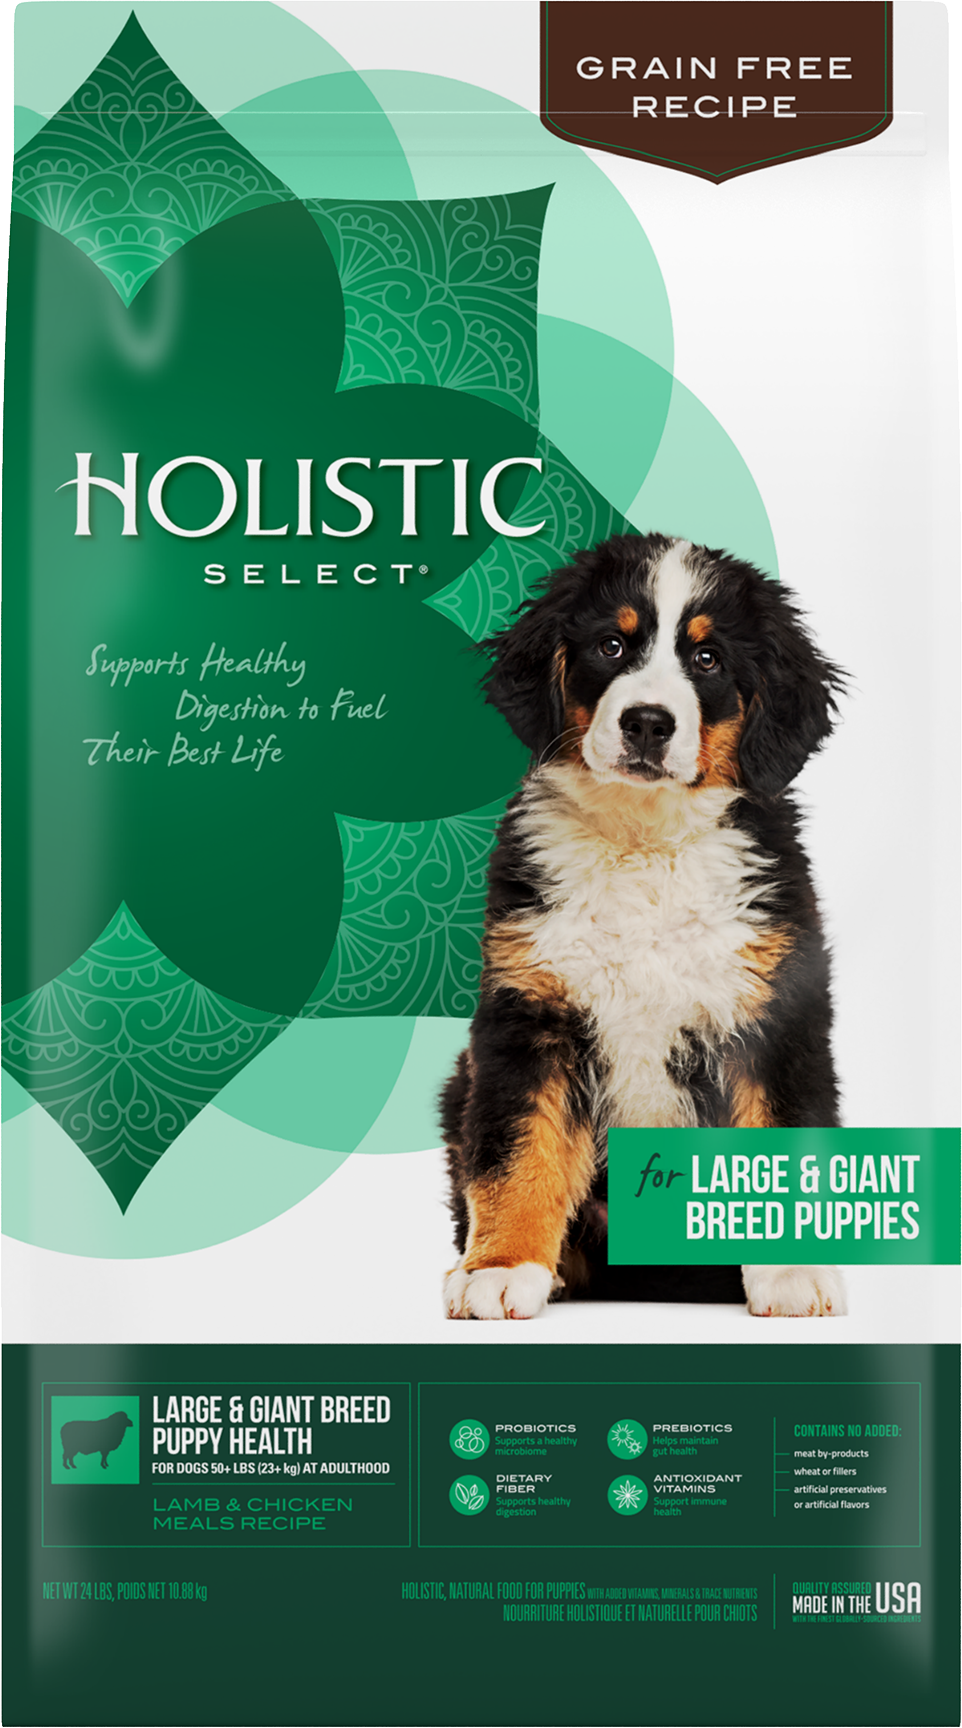 Grain Free Large & Giant Breed Puppy product packaging image 1